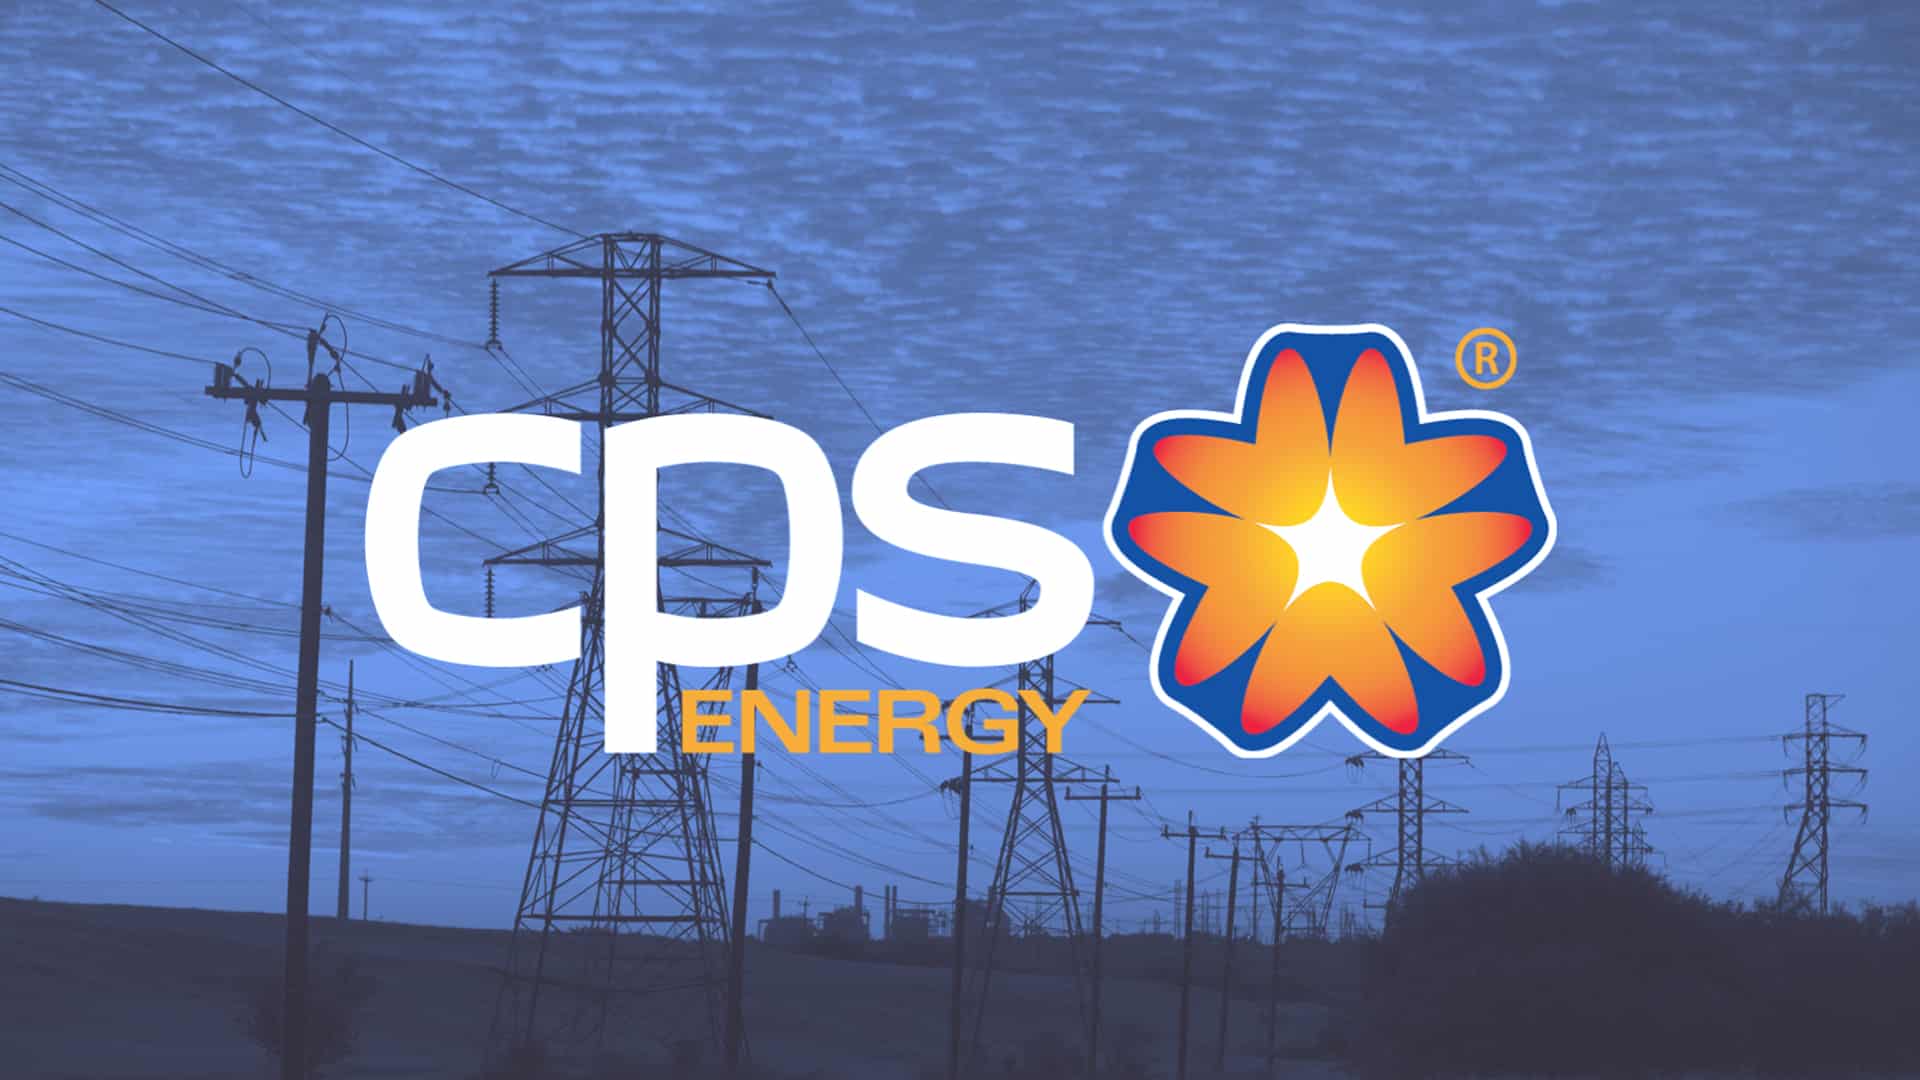 CPS Energy And VIA Announce Renewable Natural Gas Partnership